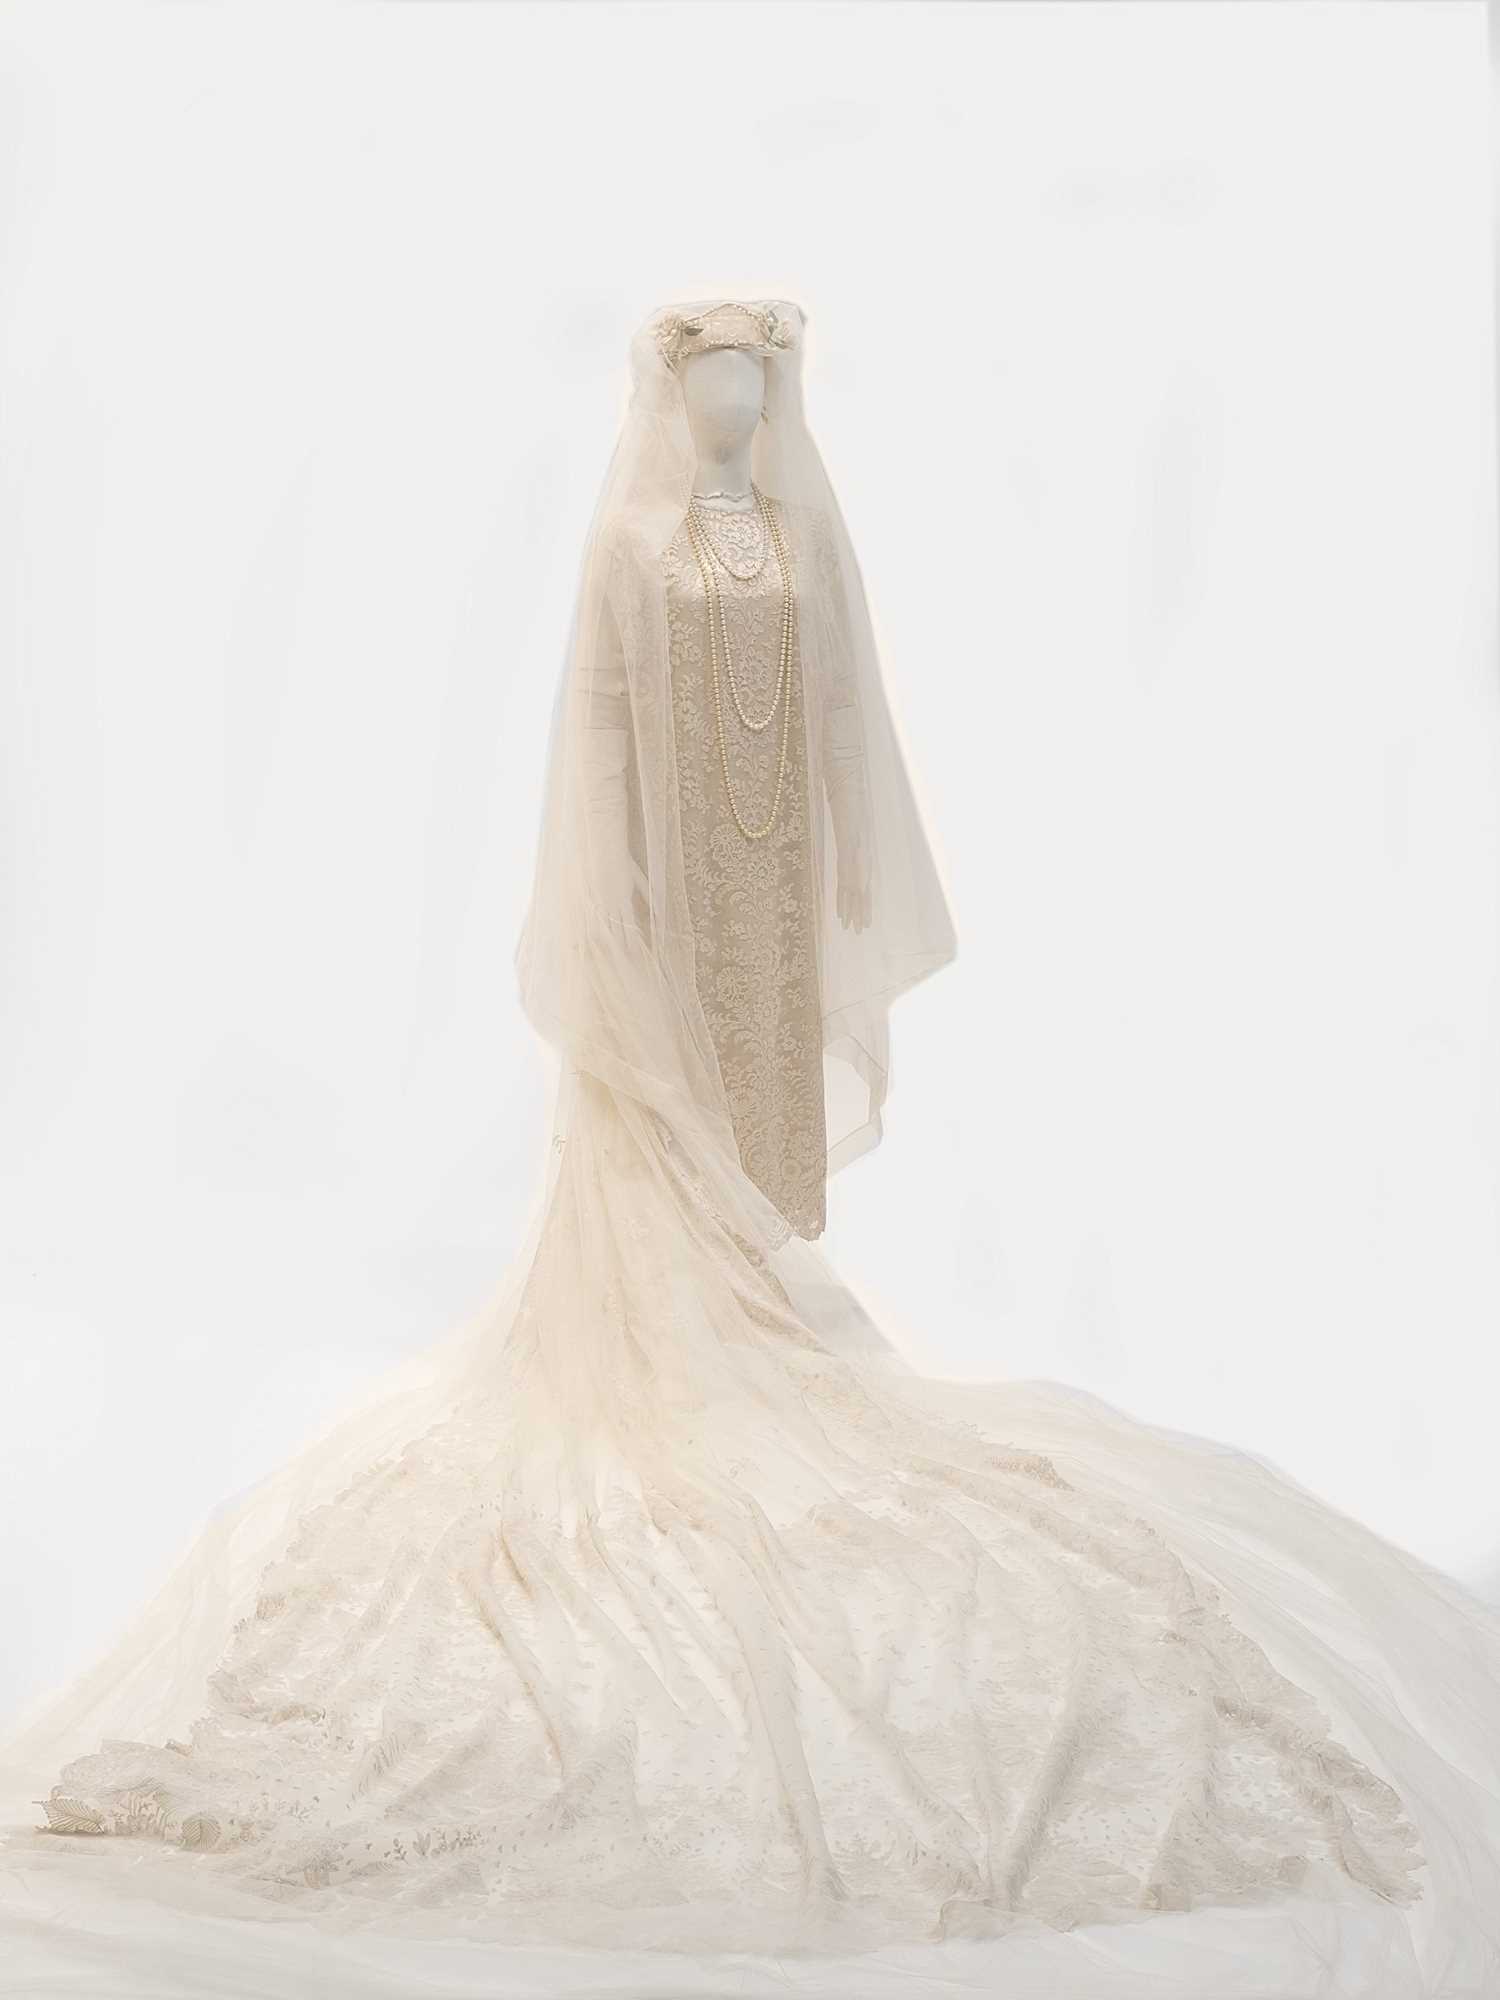 Lot 103 - Wedding dress or period costume designed by John Bright, BAFTA & Academy award winning costume designer, to be made and fitted at his costume house Cosprop, London